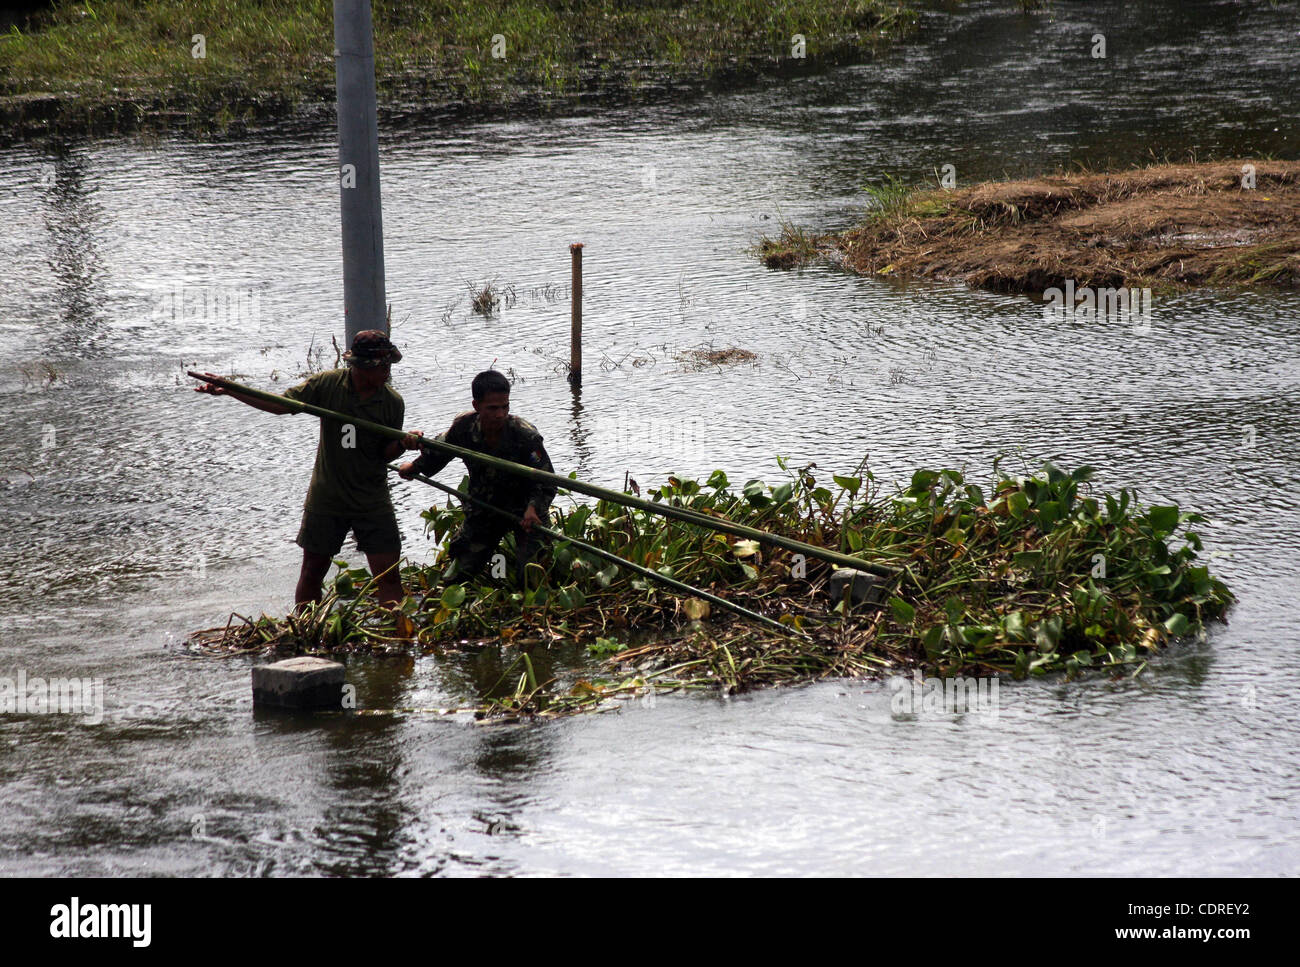 June 20, 2011 - Cotabato, Philippines - Filipino soldiers remove water lilies that caused widespread flooding and displaced thousands of people in almost two weeks in the southern Philippines. More than a half million people were displaced by the floods. The military said Tuesday that flashfloods in Stock Photo